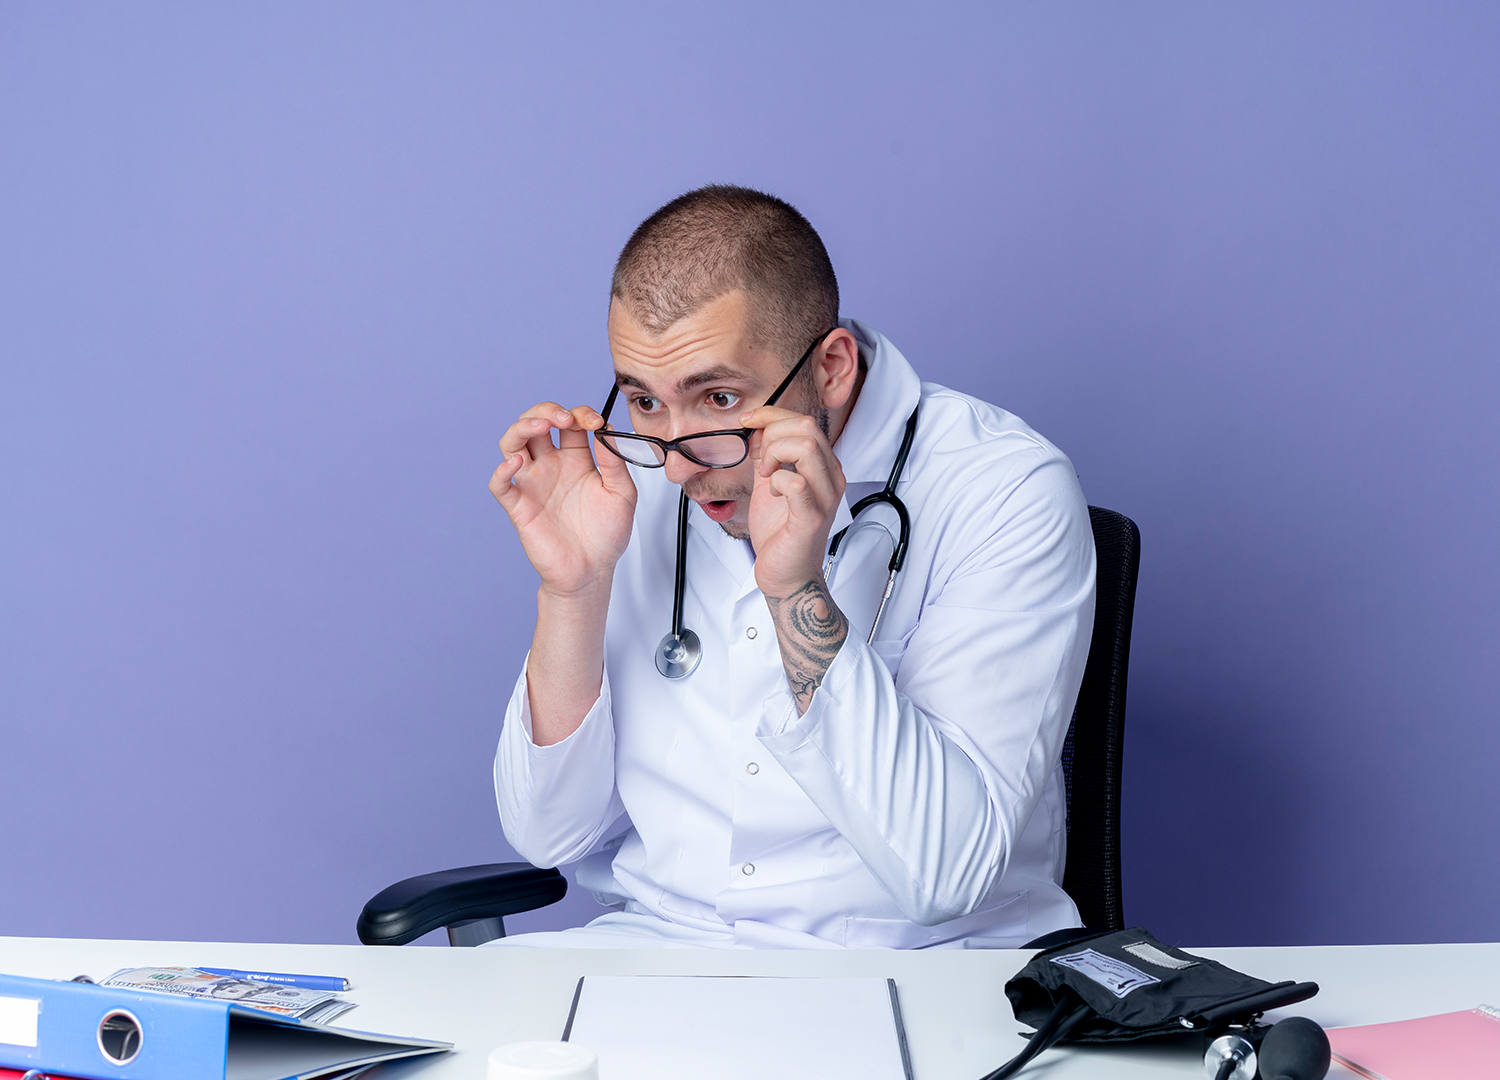 A physician sitting at his desk going through mental burnout